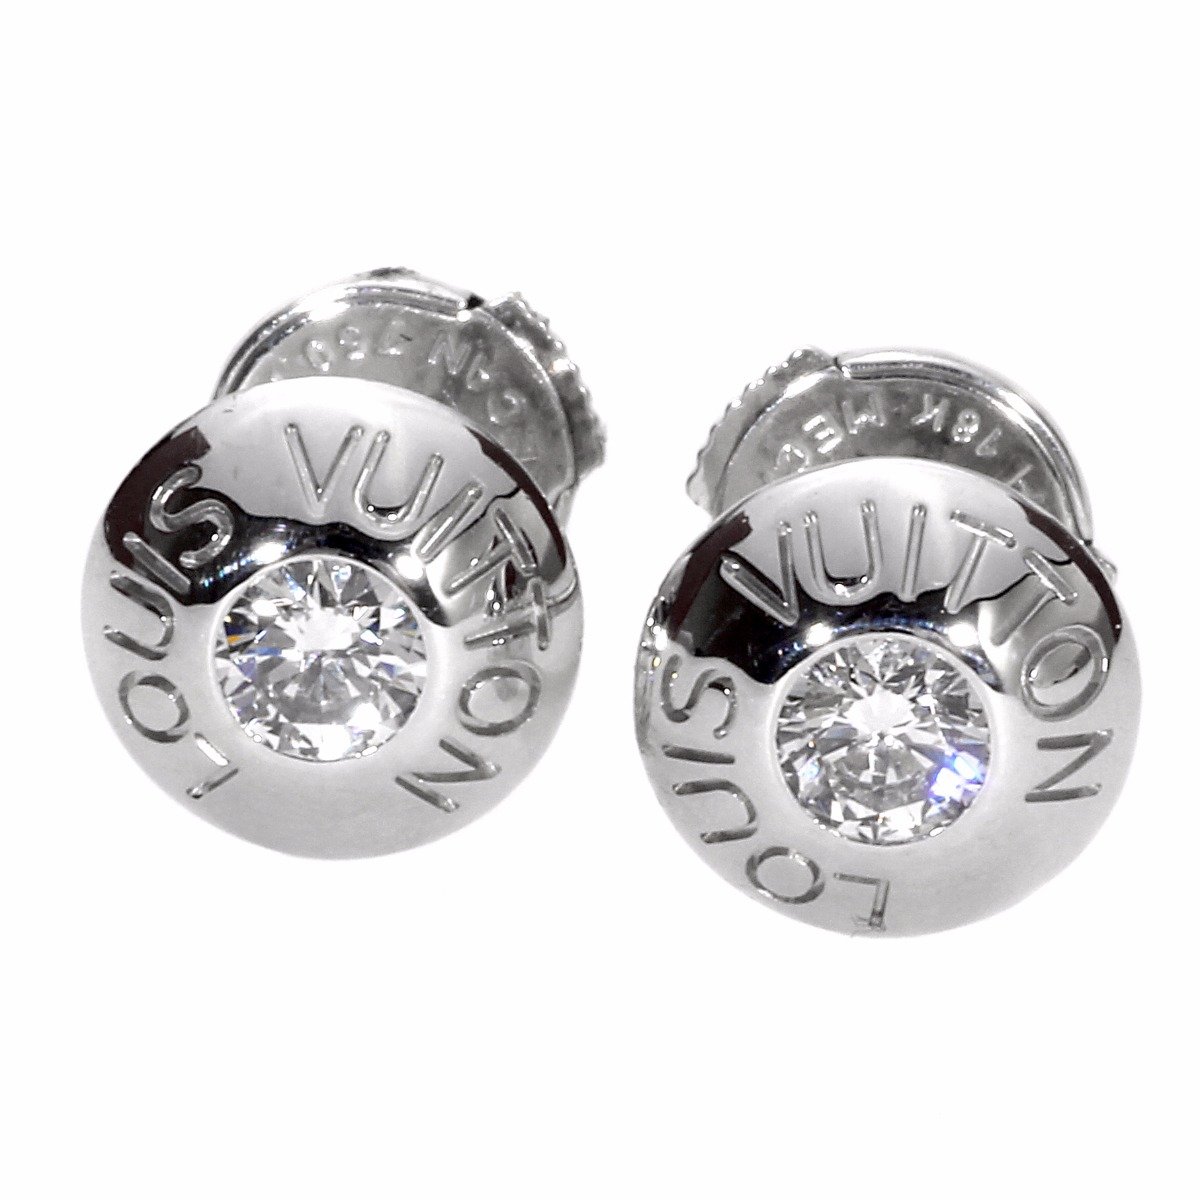 Louis Vuitton dentelle Earrings in 18K White Gold 0.80 ctw - Earrings / White Gold | Pre-owned & Certified | used Second Hand | Womens